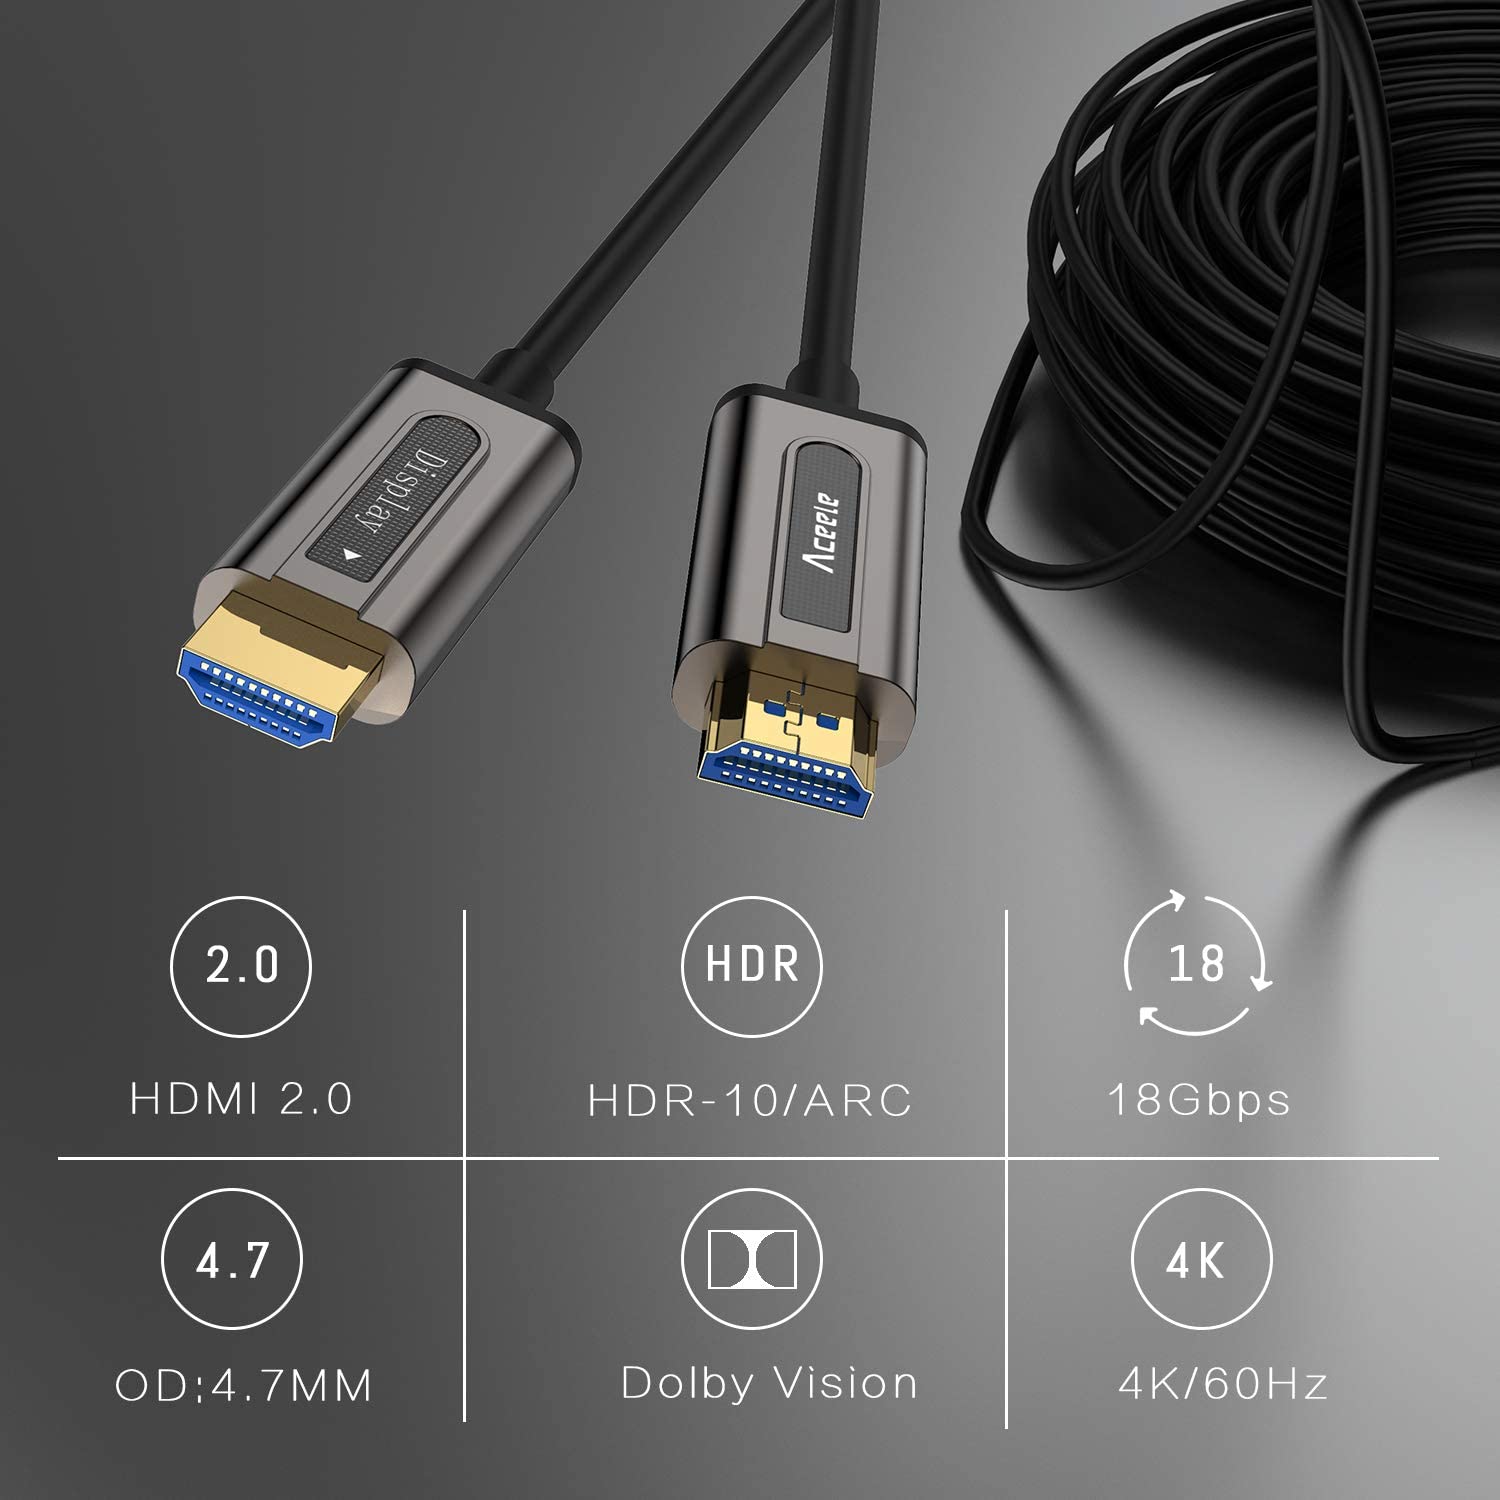 03-90320 Fibre Optic HDMI Cable, Aceele 4K HDMI Cable 20m, High Speed HDMI to HDMI Extender Cable for Xbox 360, PS3/PS4 to Connect Displays, HDTVs and More - 5m